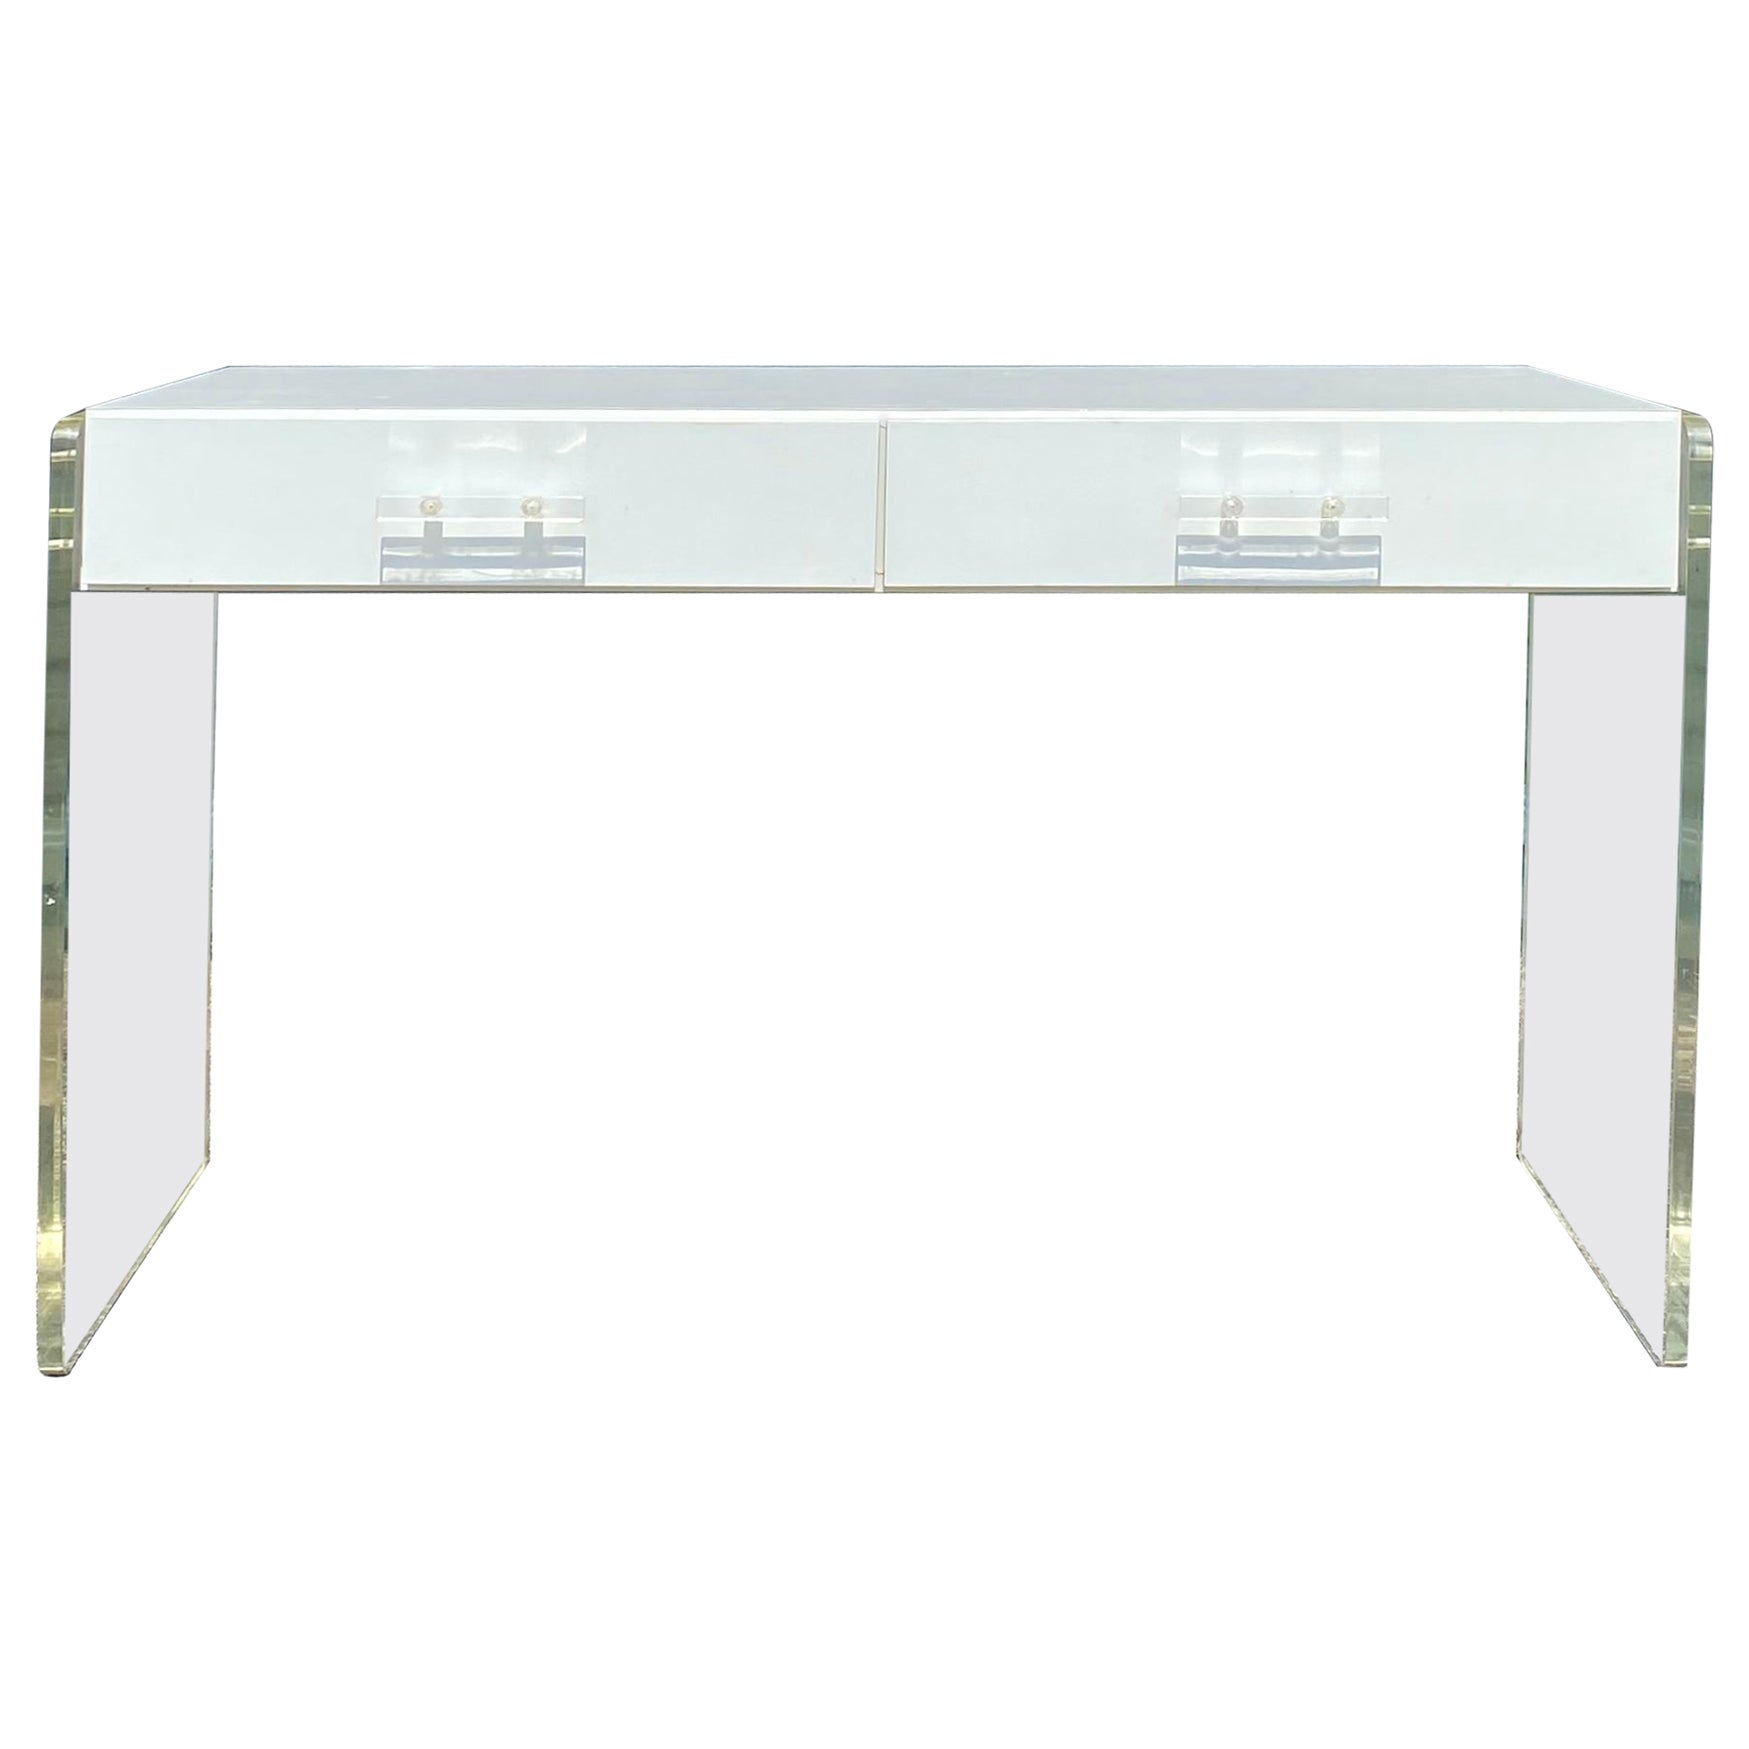 1970s White Lucite Wood Floating Desk Console Table